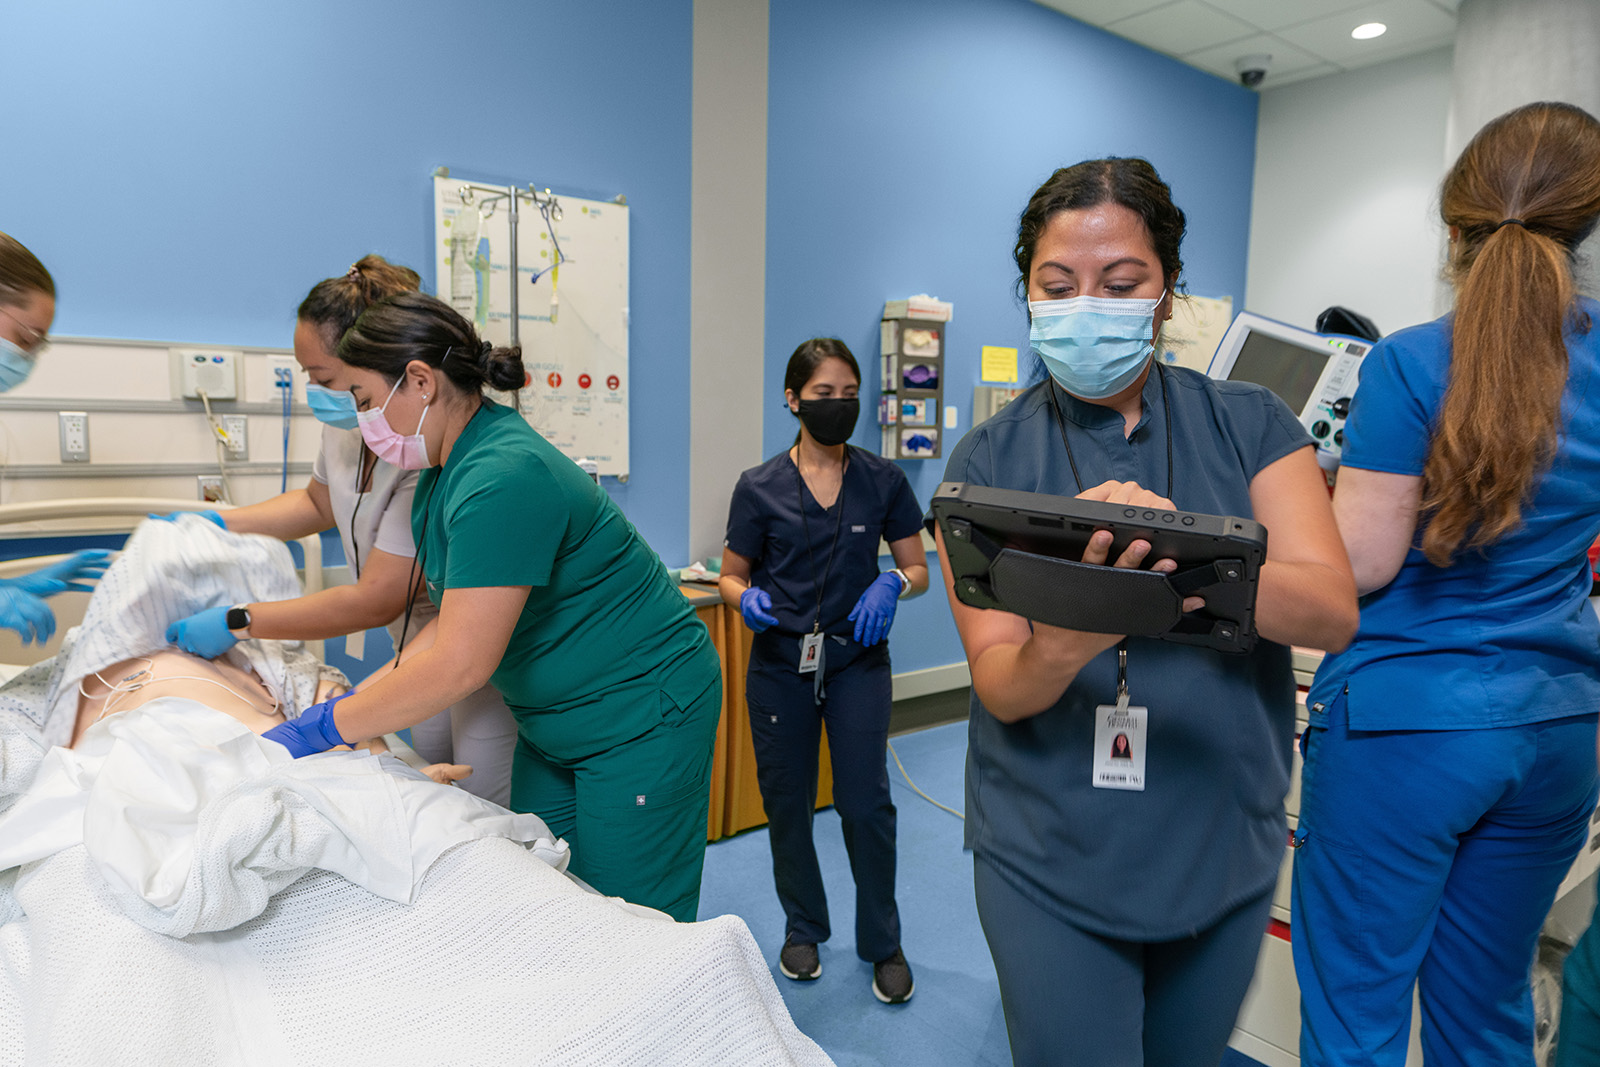 Resuscitation Training Best Practices: High-Fidelity vs. Low-Fidelity Code Blue Simulations